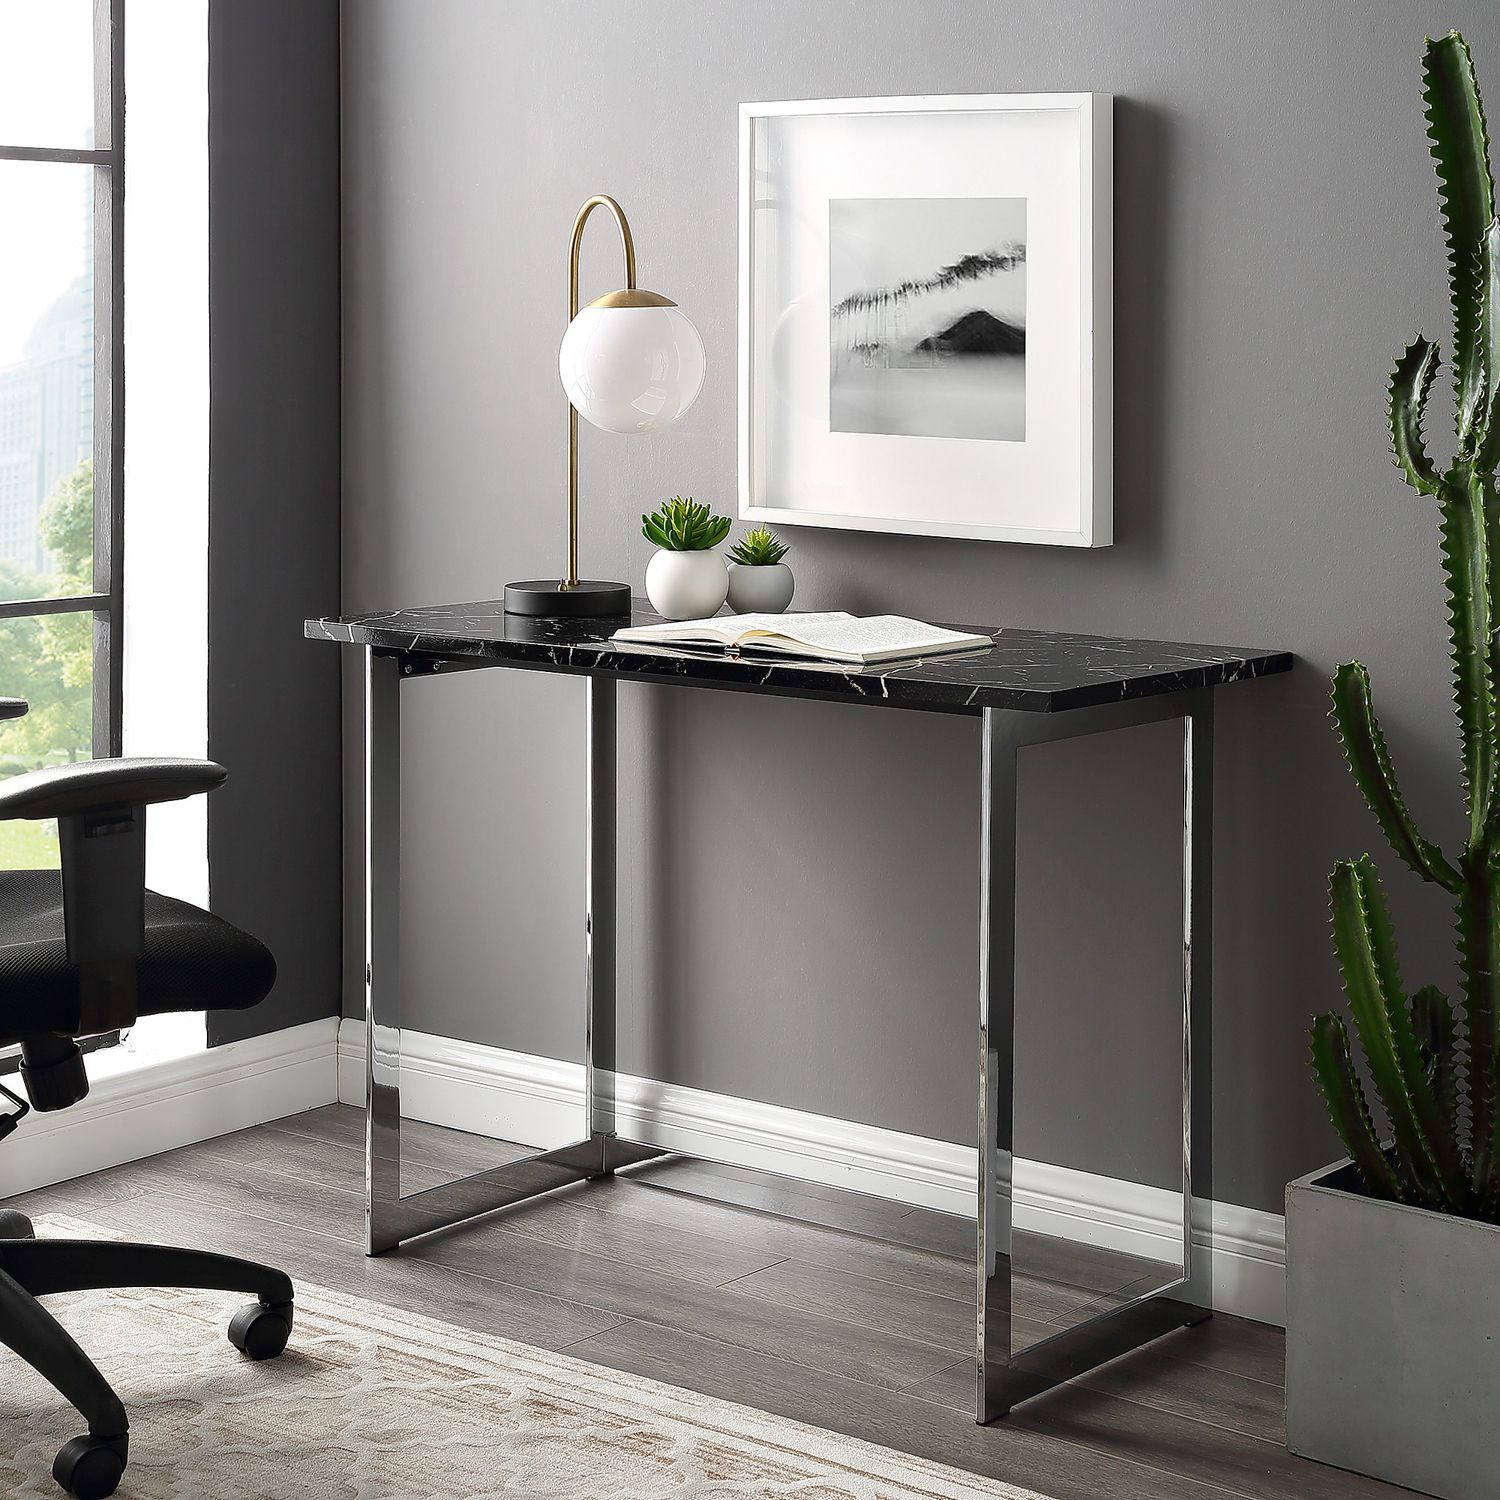 Elegant Glam Faux Marble Writing Desk – Pier1 Imports For Gold And Wood Glam Modern Writing Desks (View 1 of 15)